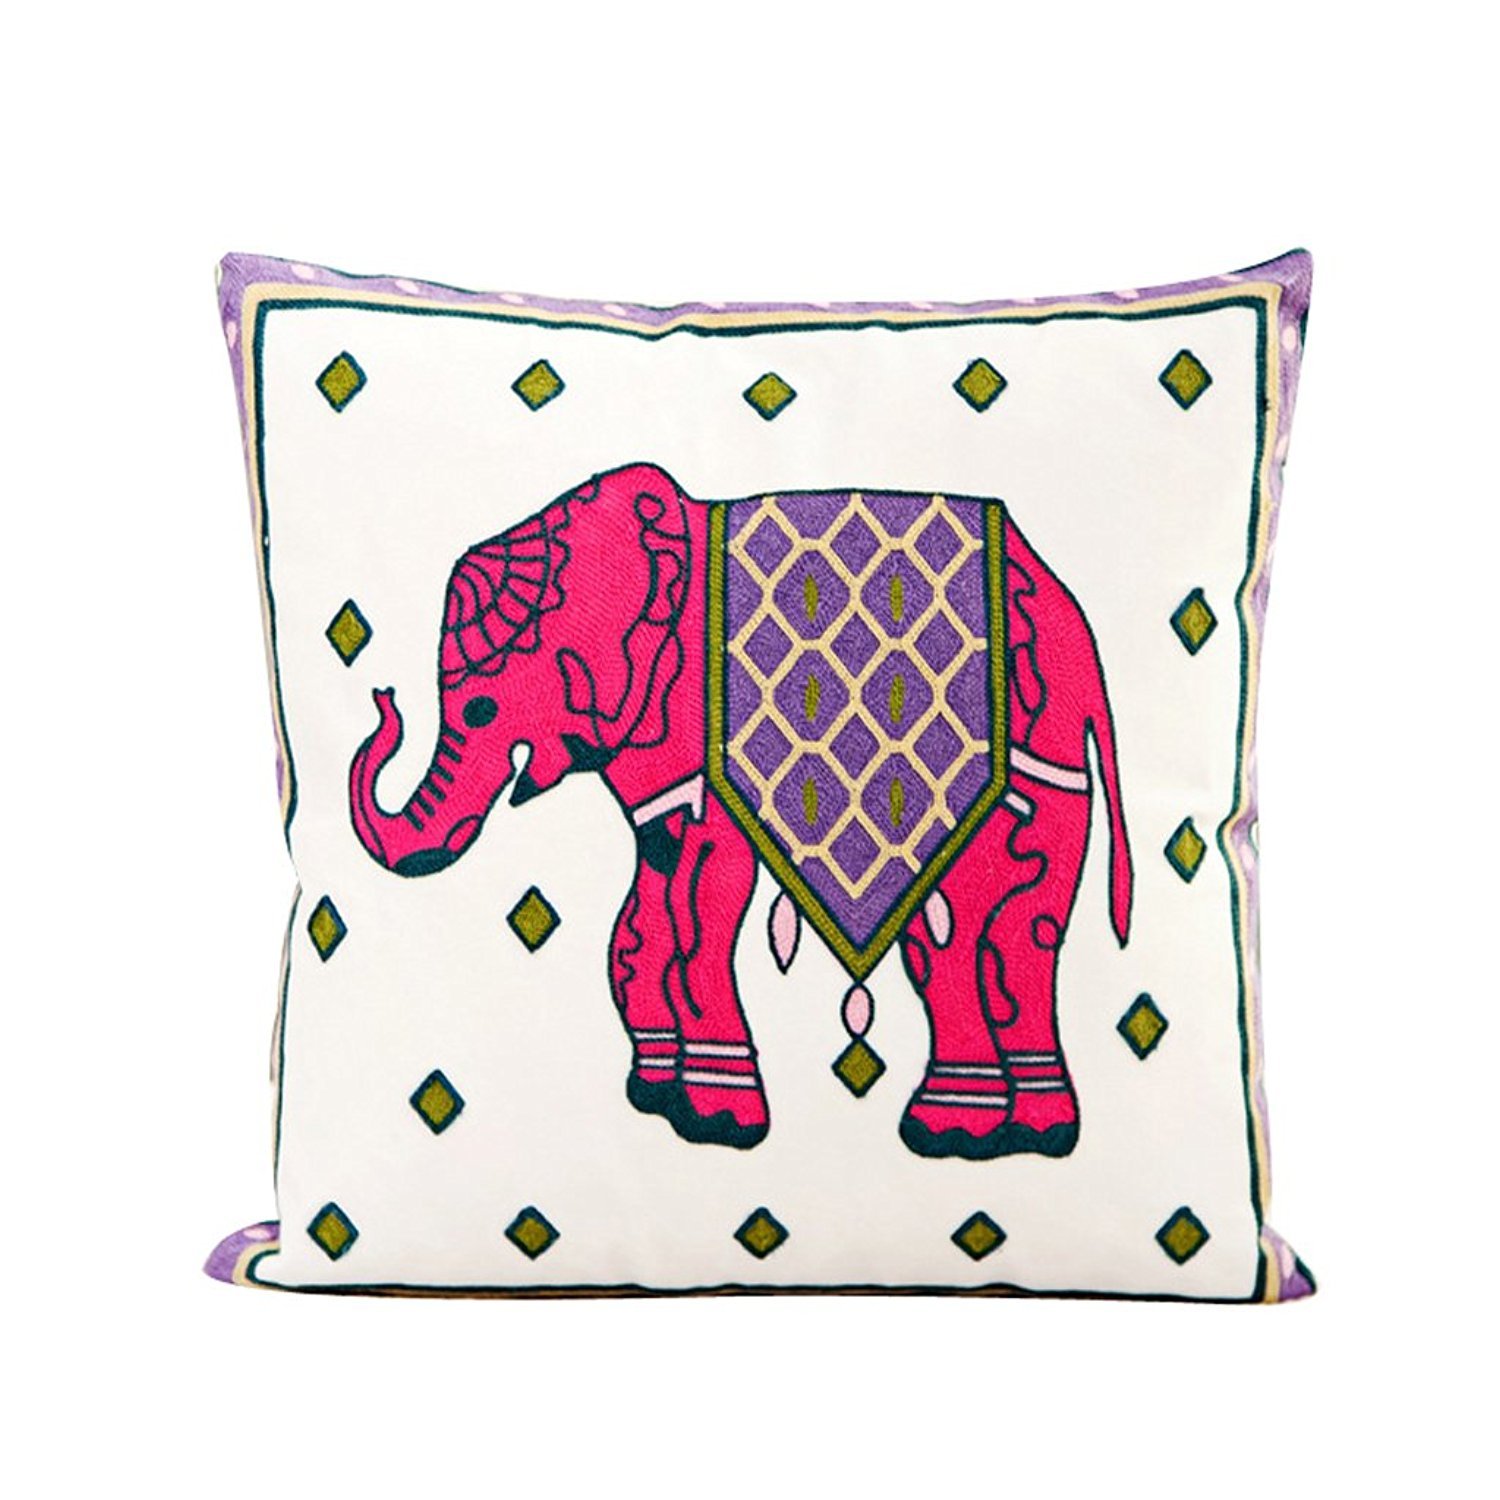 Book Cover Pink Elephant Cotton Throw Pillow Case Cushion Cover Sofa Home Bed Decor by OOOUSE